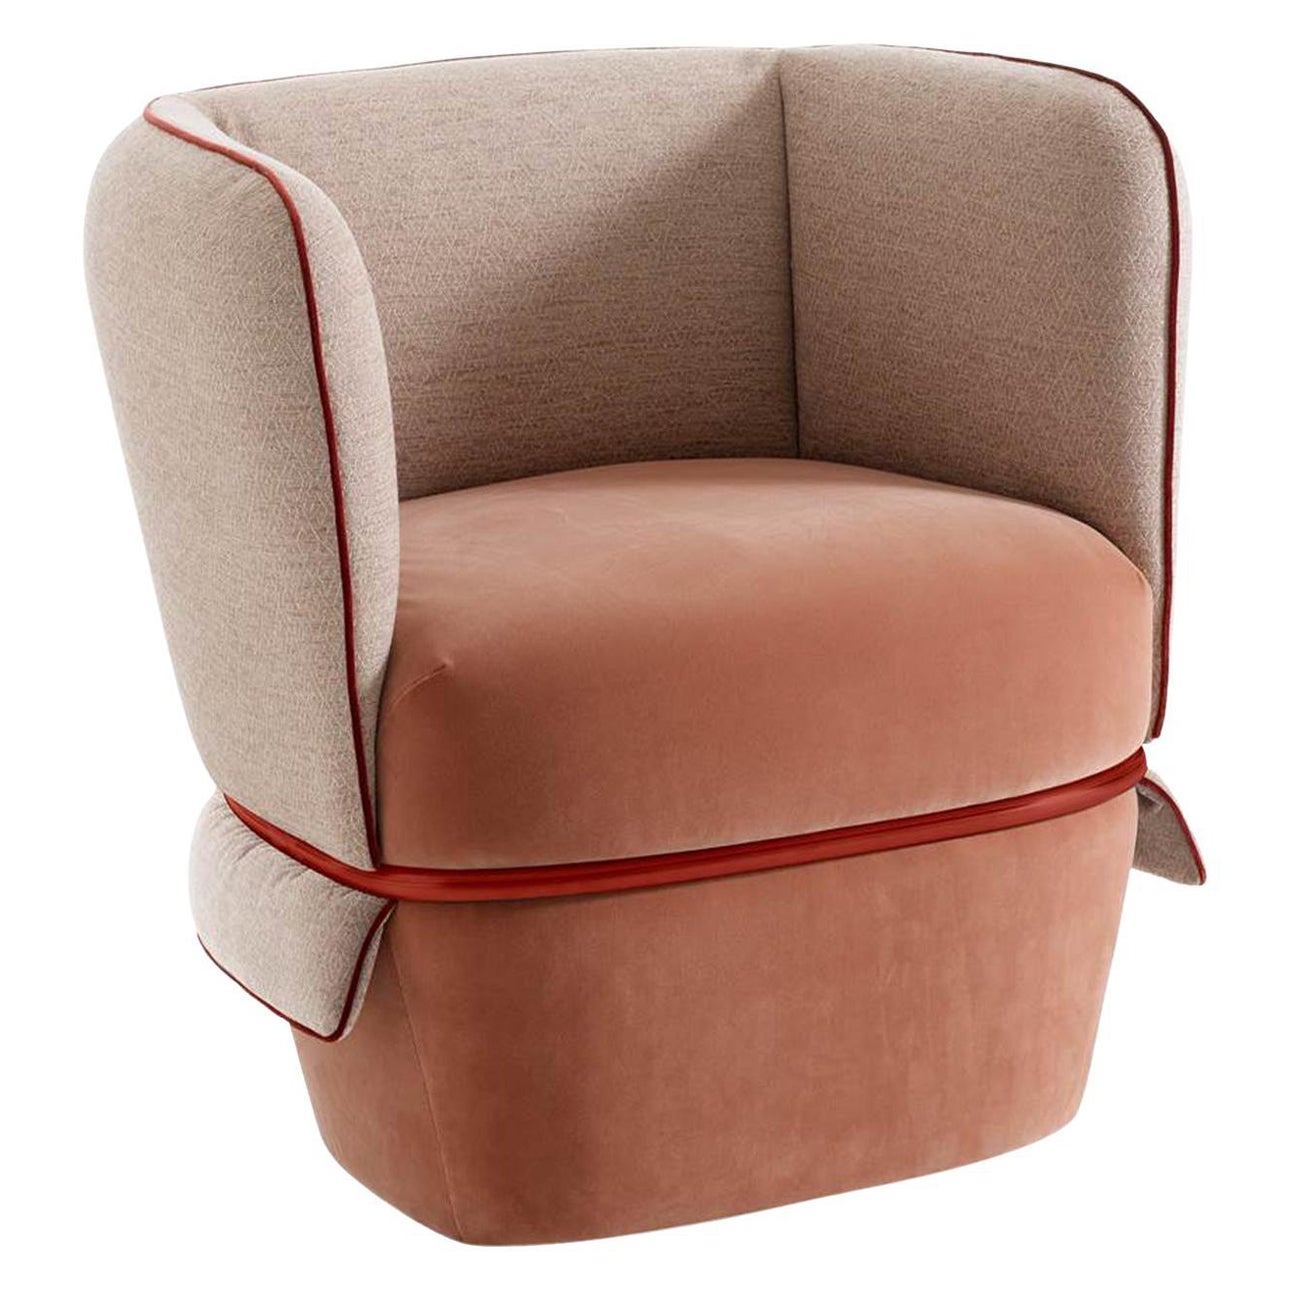 Chemise Pink and Beige Armchair by Studio LI_DO For Sale